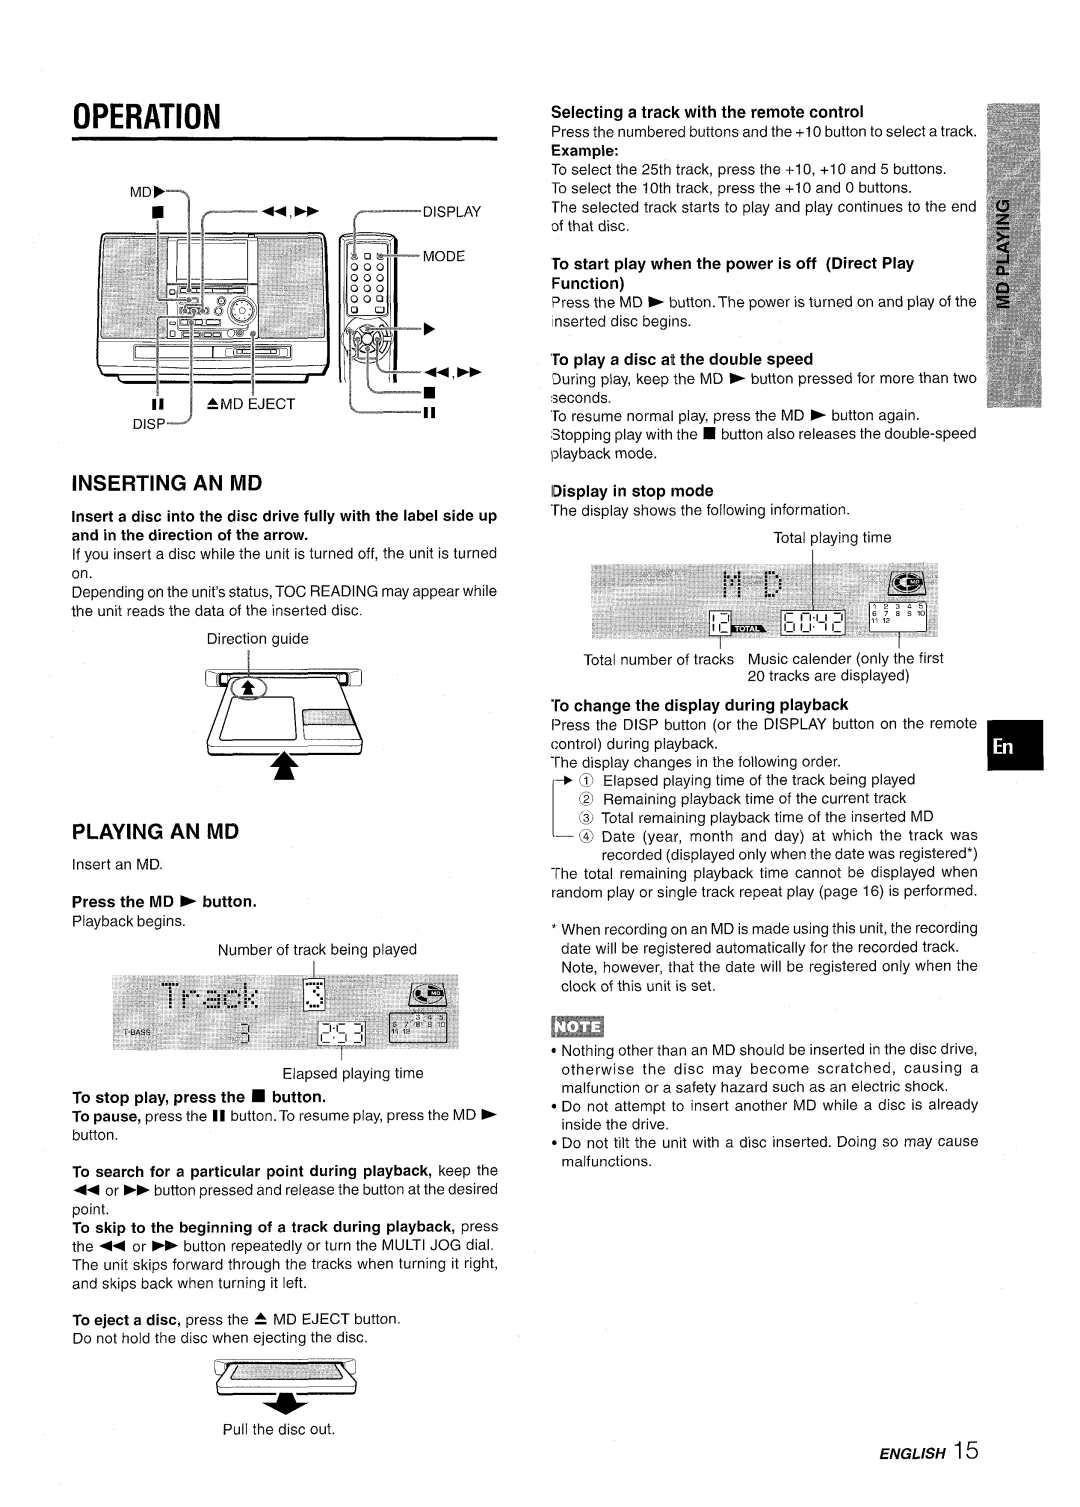 Aiwa CSD-MD50 manual Inserting An Md, Playing An Md, Operation, Press the MD button Playback begins, lDisplay in stop mode 